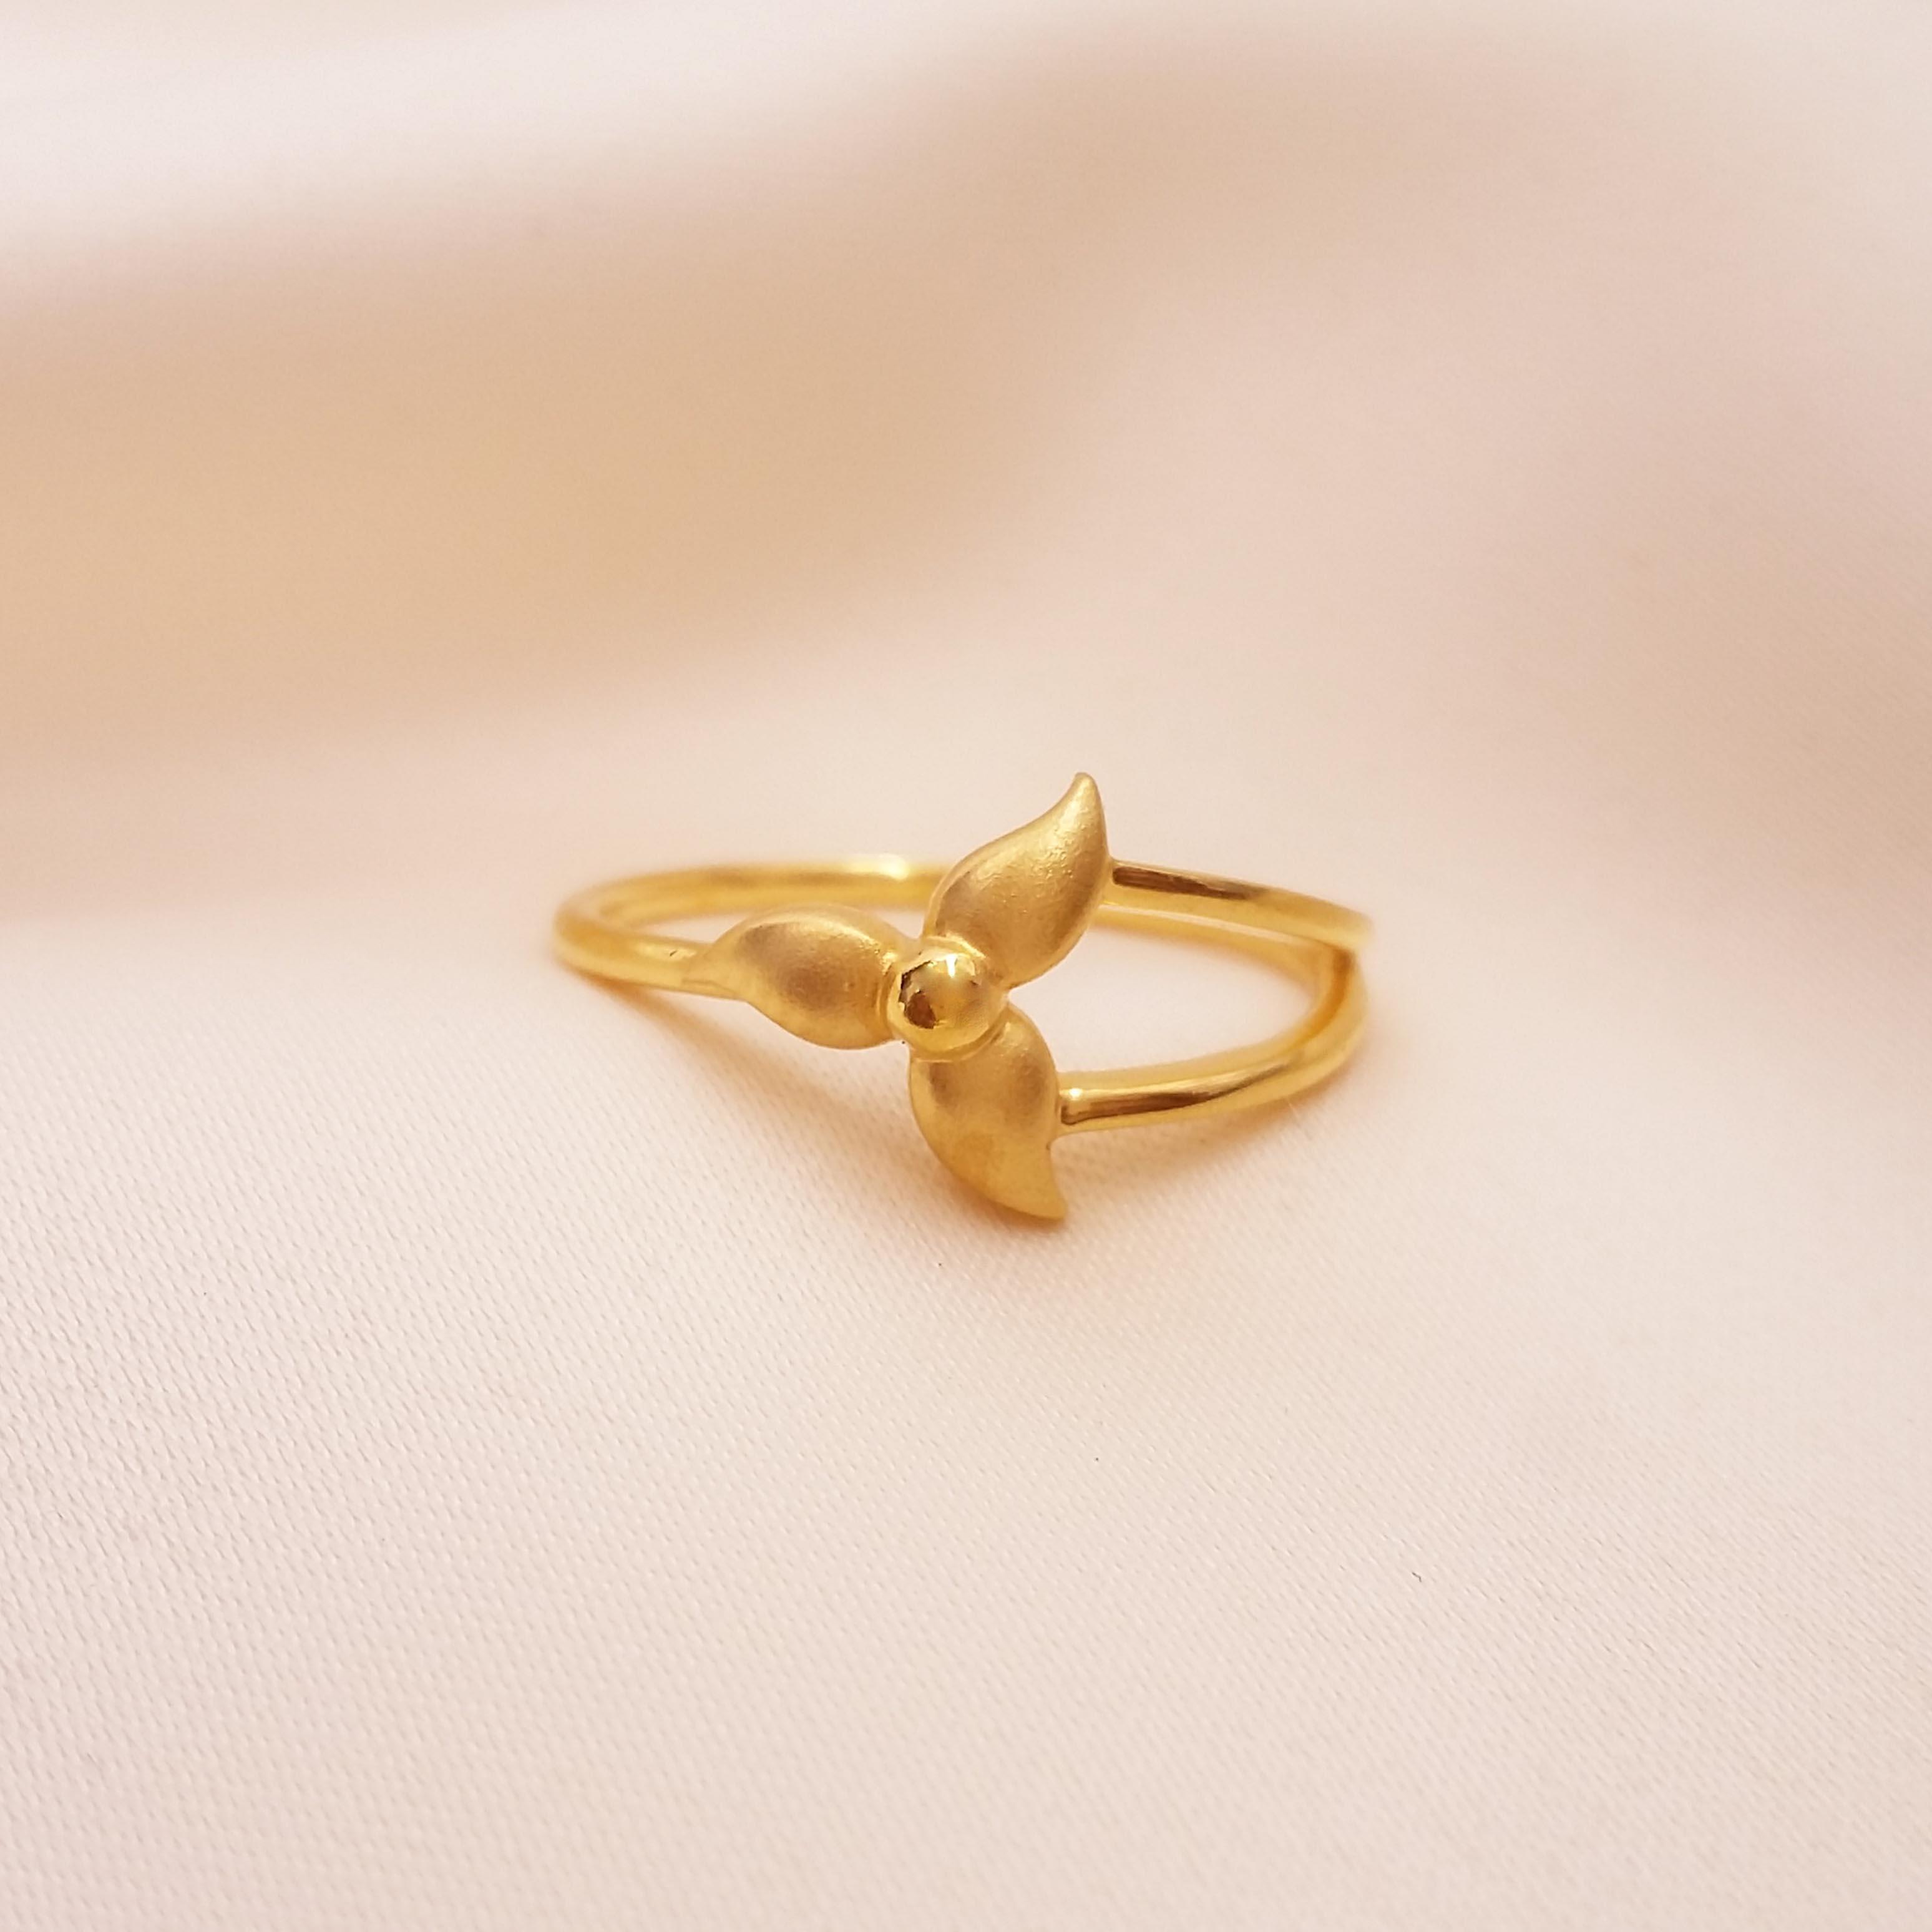 Buy 22Kt Simple Square Gold Ring For Kids 93VD7309 Online from Vaibhav  Jewellers